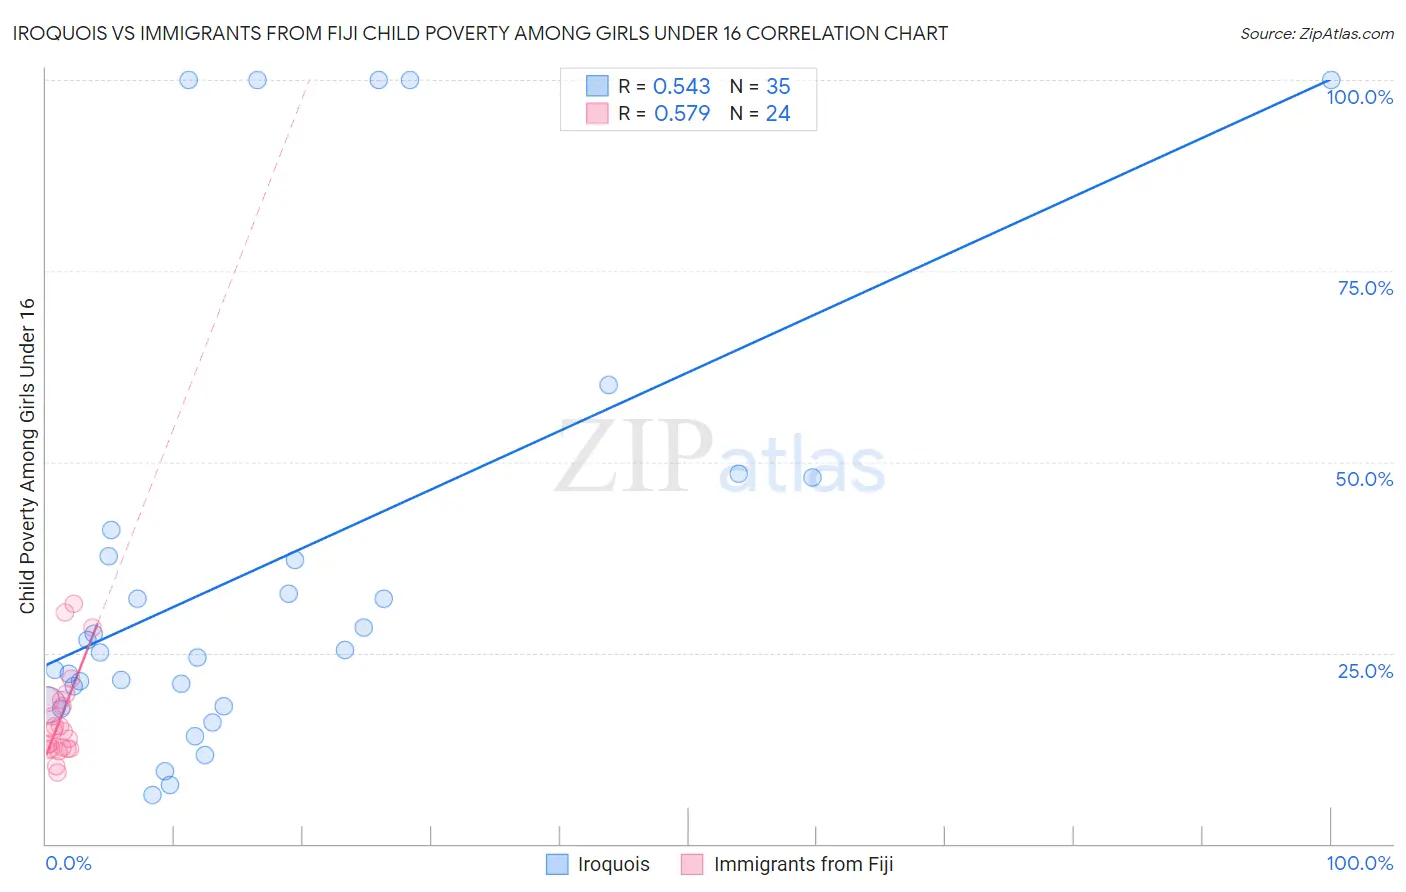 Iroquois vs Immigrants from Fiji Child Poverty Among Girls Under 16